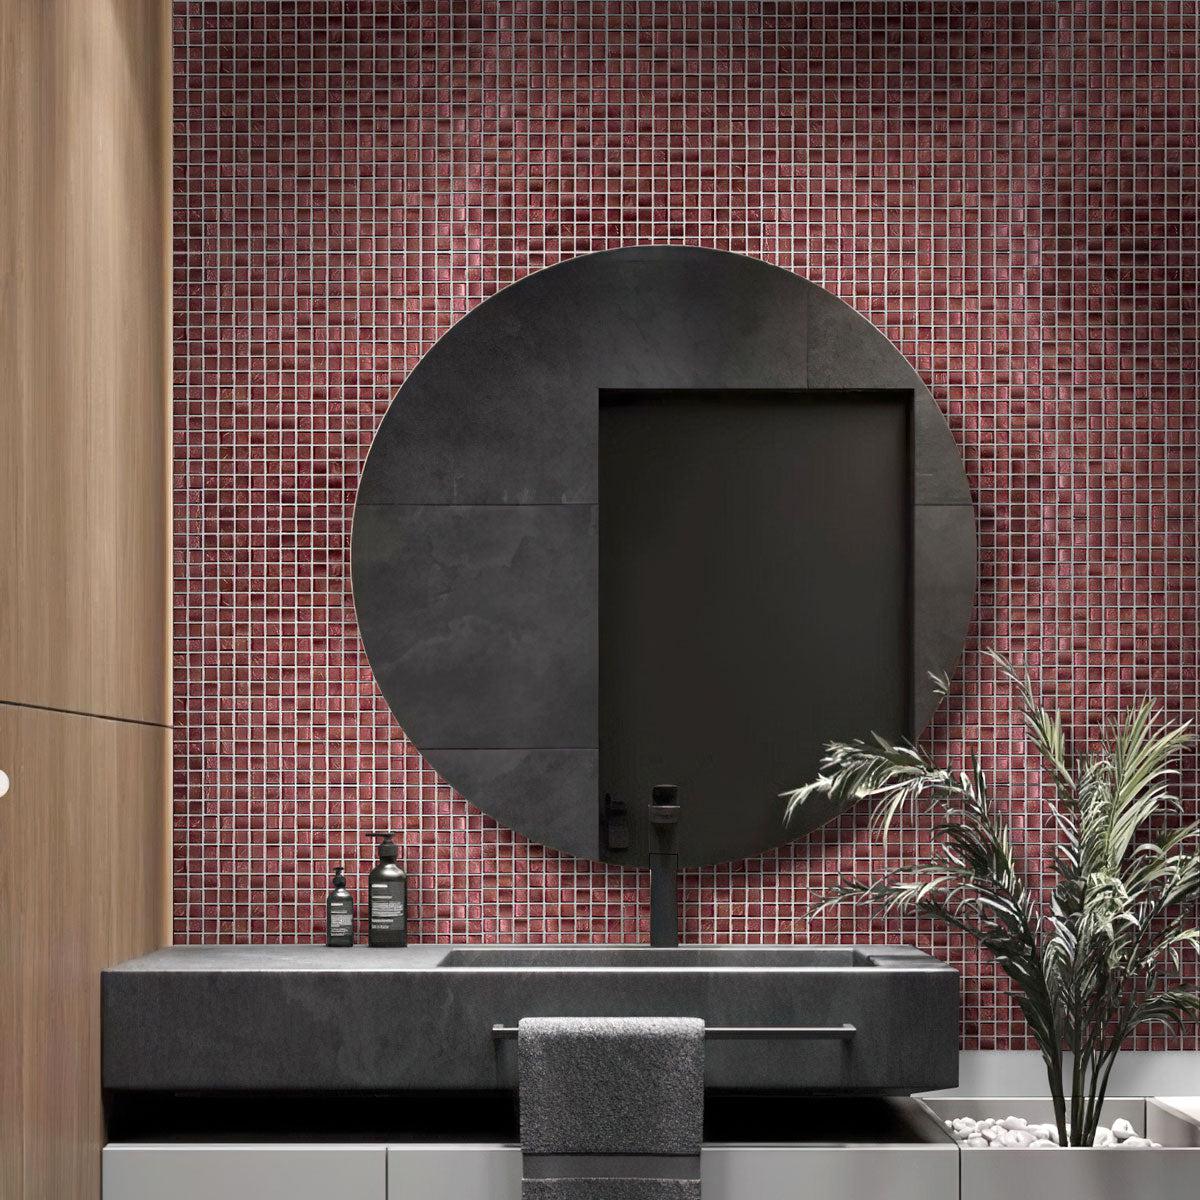 The bathroom is accented with Foiled Burgundy Squares Glass Tile